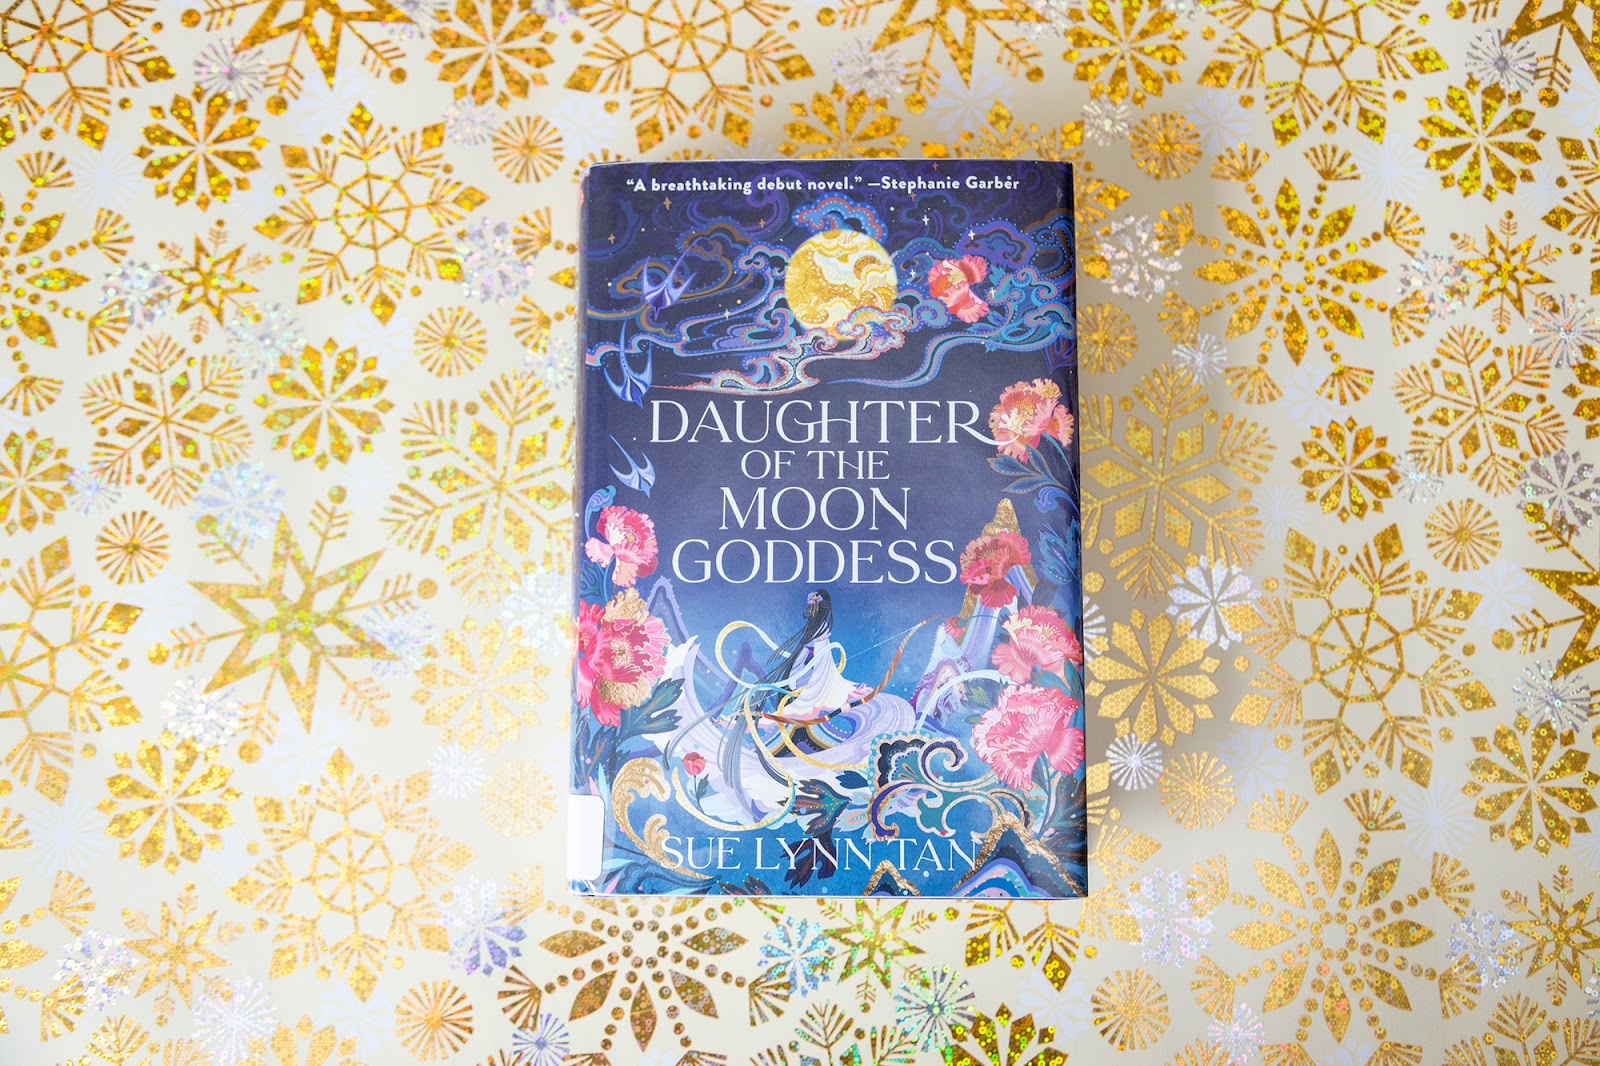 Daughter of the Moon Goddess book cover in our holiday gift guide for AAPI books